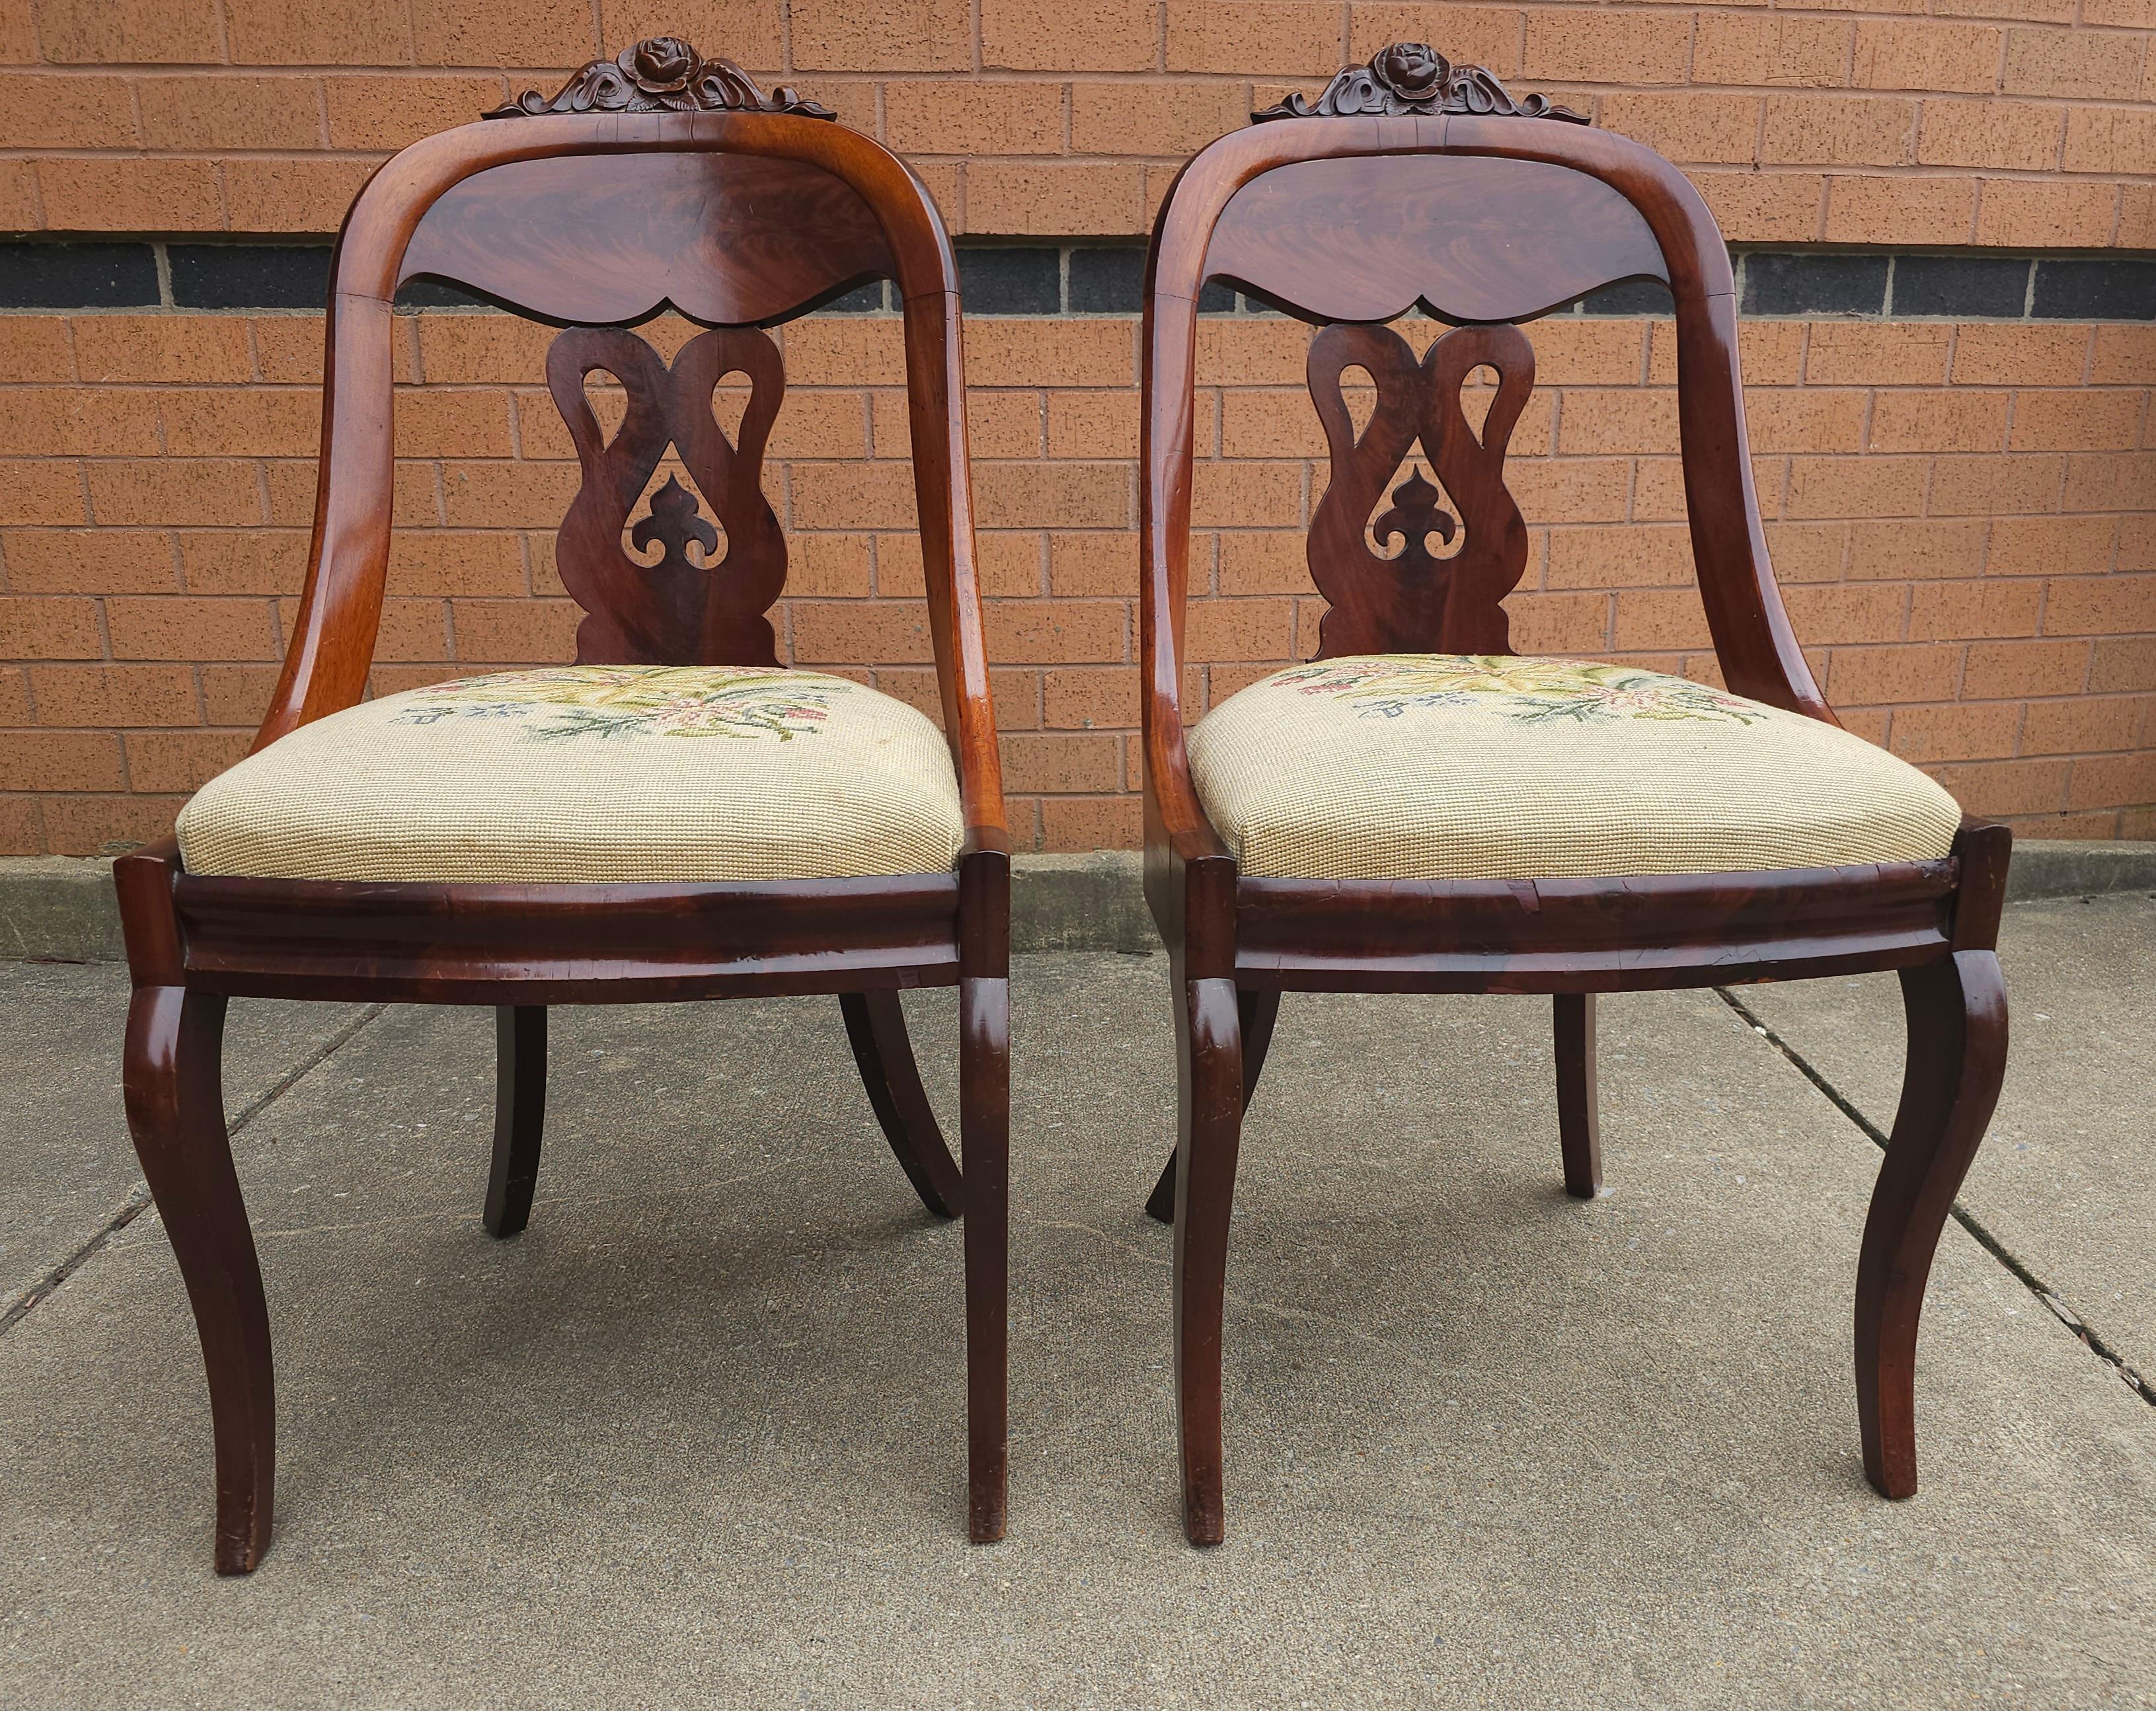 Pair 19th C. American Empire Carved Magogany and Upholstered Chairs In Good Condition For Sale In Germantown, MD